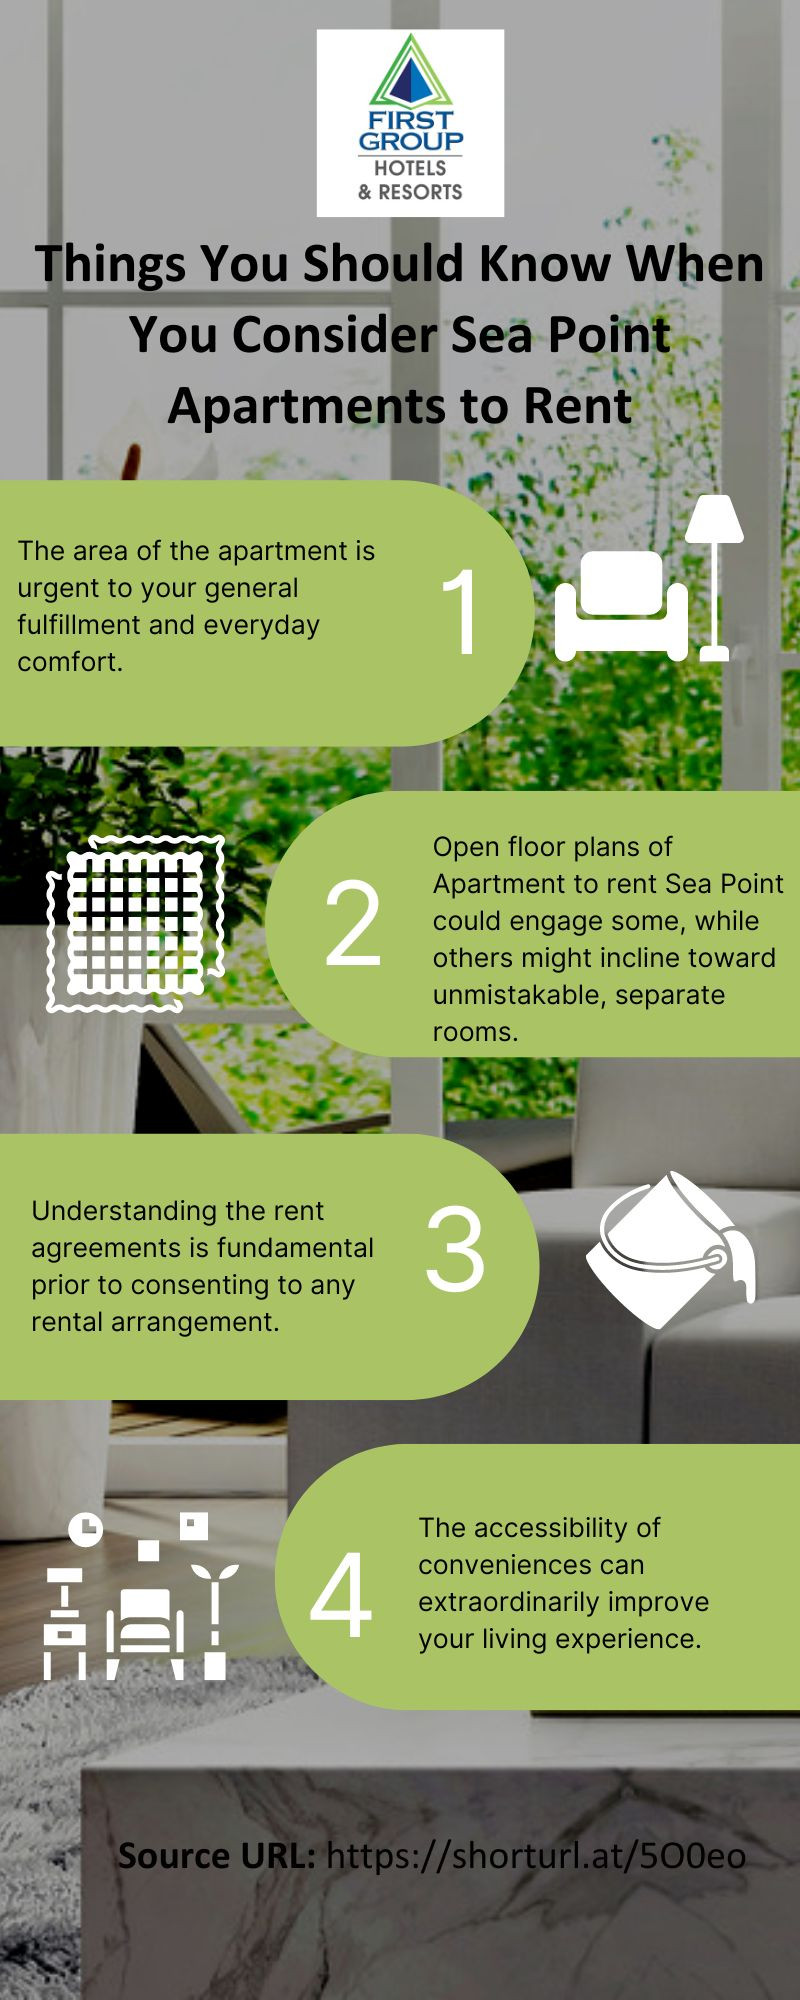 Things You Should Know When You Consider Sea Point Apartments to Rent - Gifyu